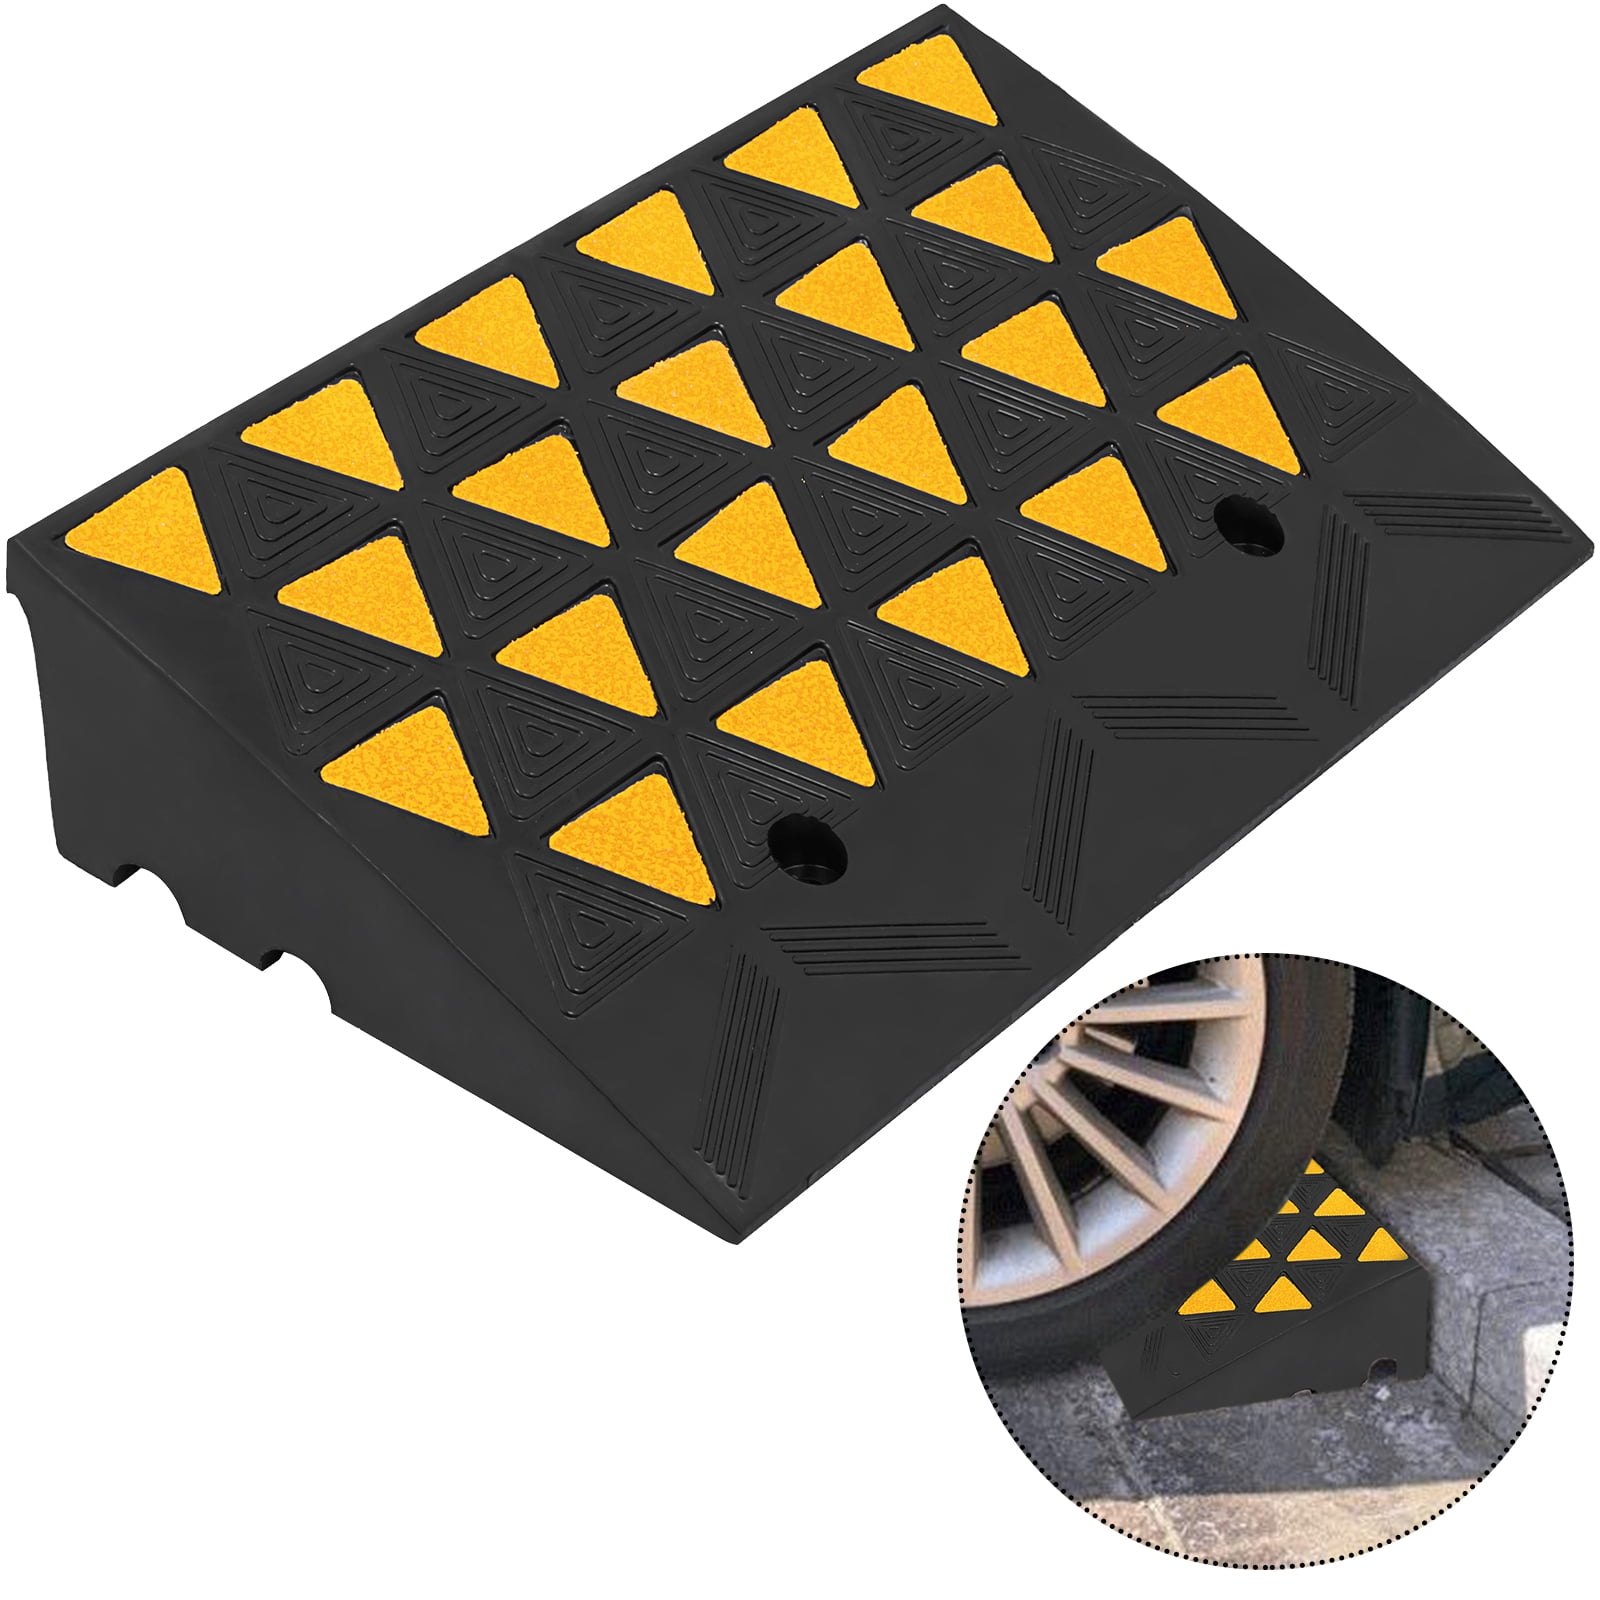 Color : Black, Size : 100256CM Parking Lot Entrance Curb Ramps Sturdy Durable Truck Ramps Home Use Step Mat Kerb Ramps 11 way bike CSQ-Ramps 4-11CM Multiple Heights Vehicle Ramps 